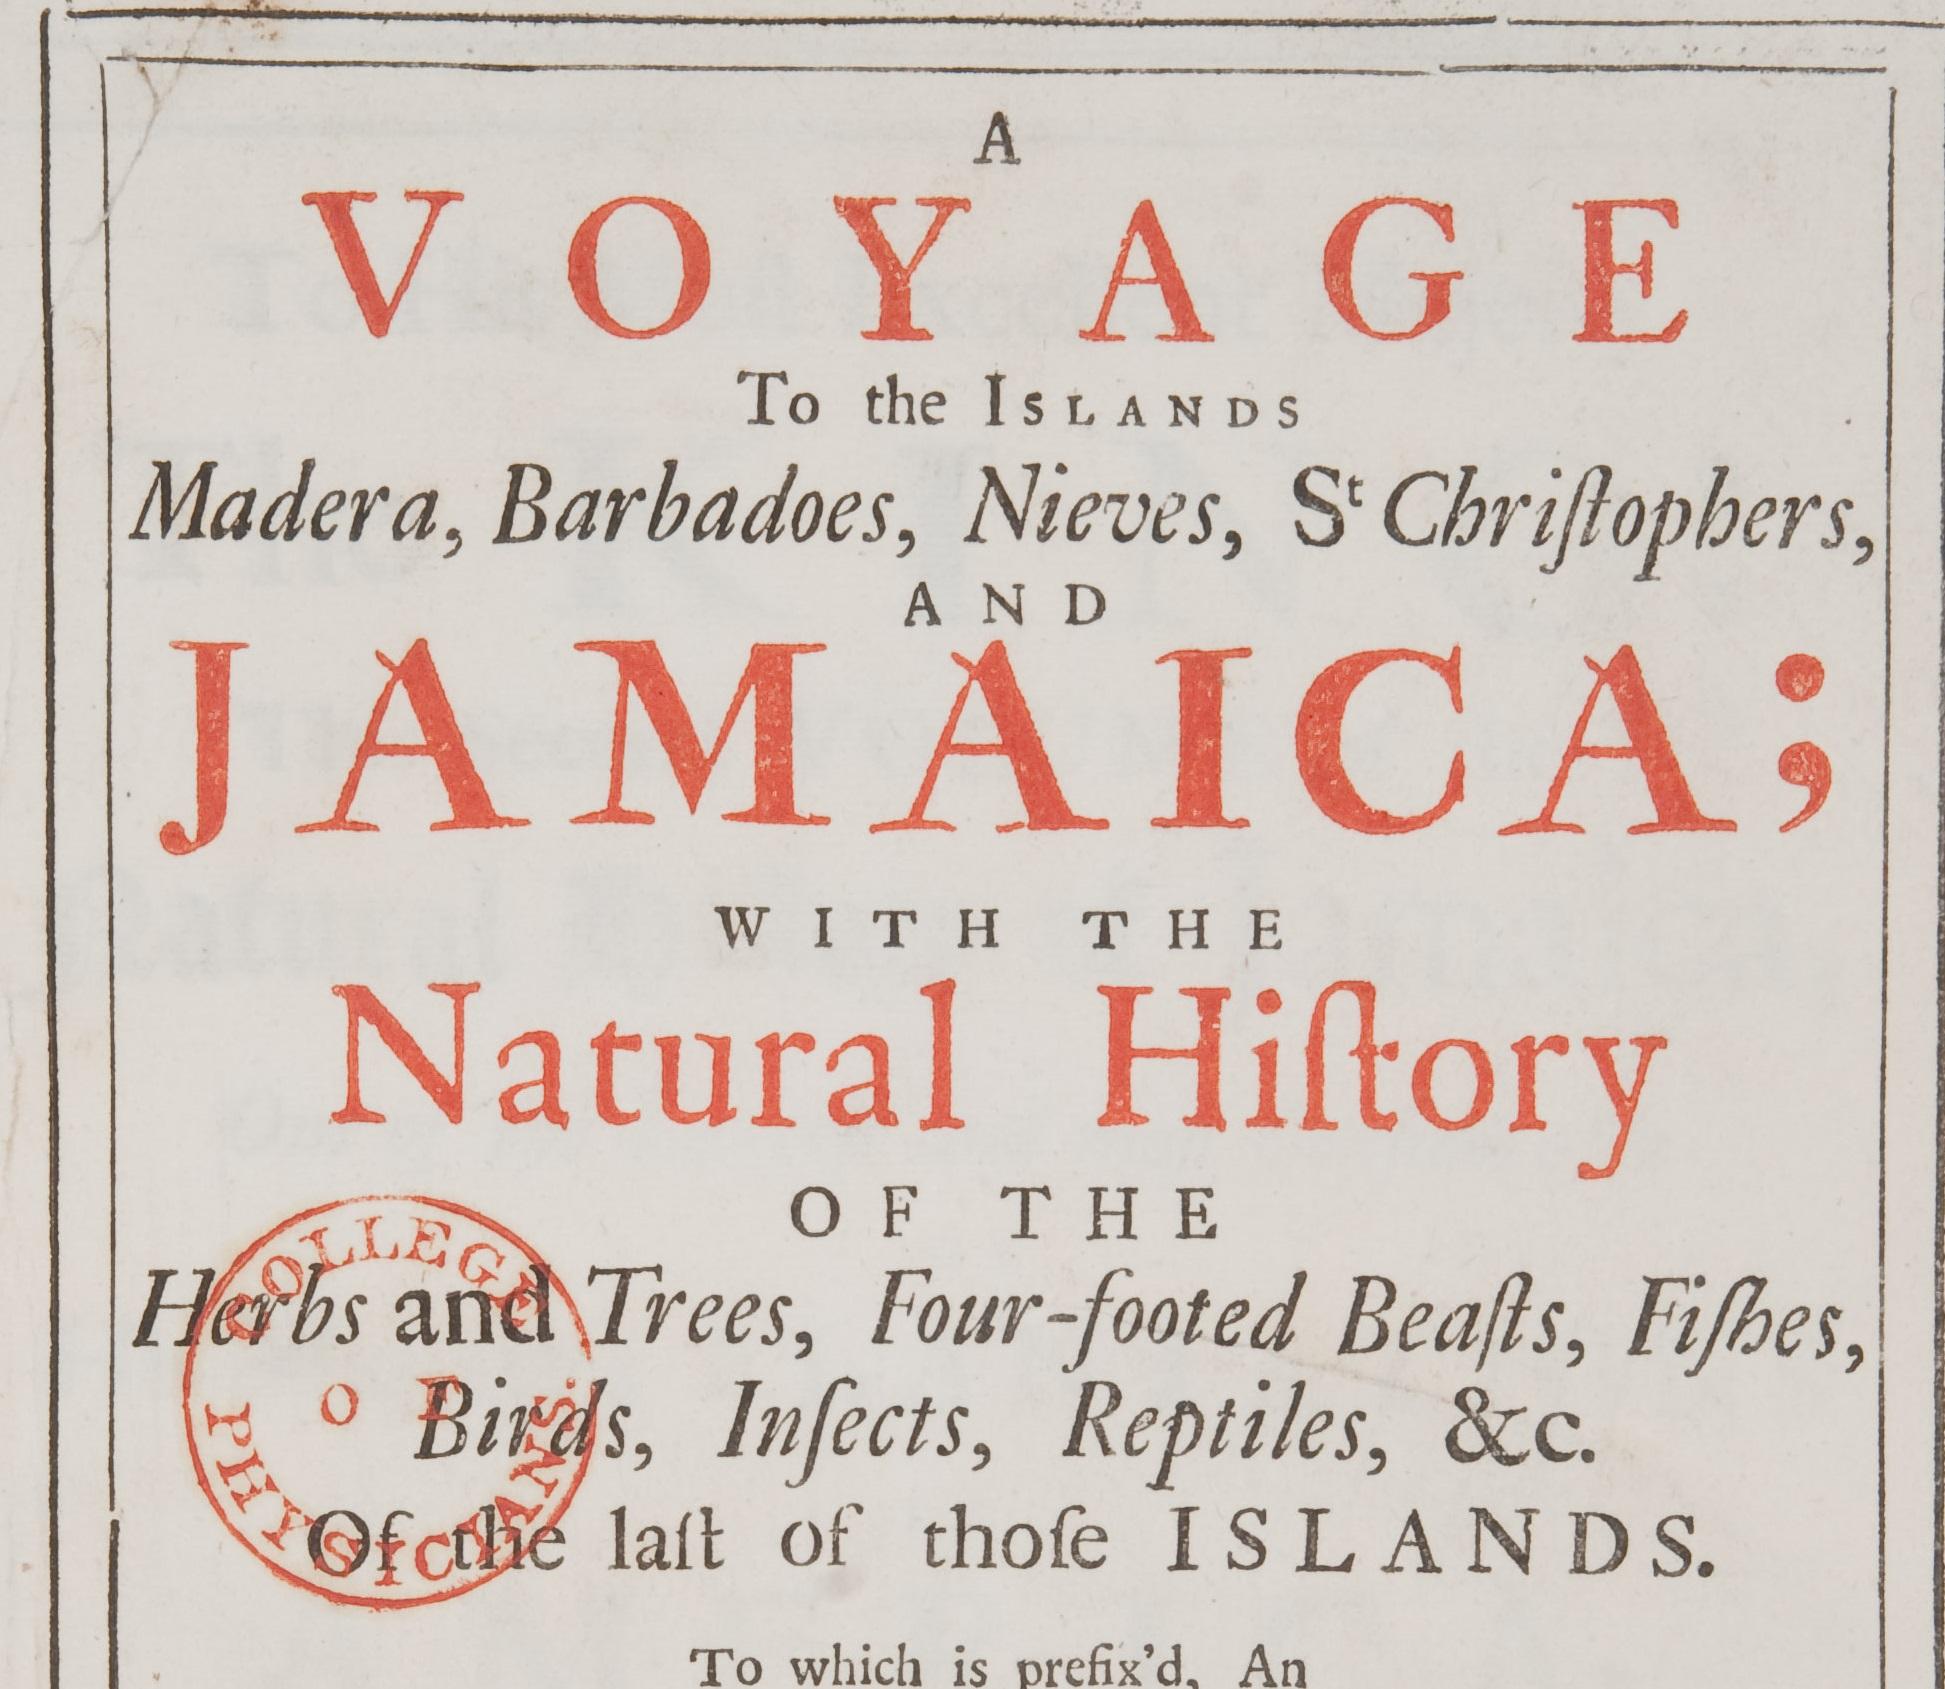 A voyage to the islands Madera, Barbadoes, Nieves, St Christophers, and Jamaica. Hans Sloane, published London, 1725